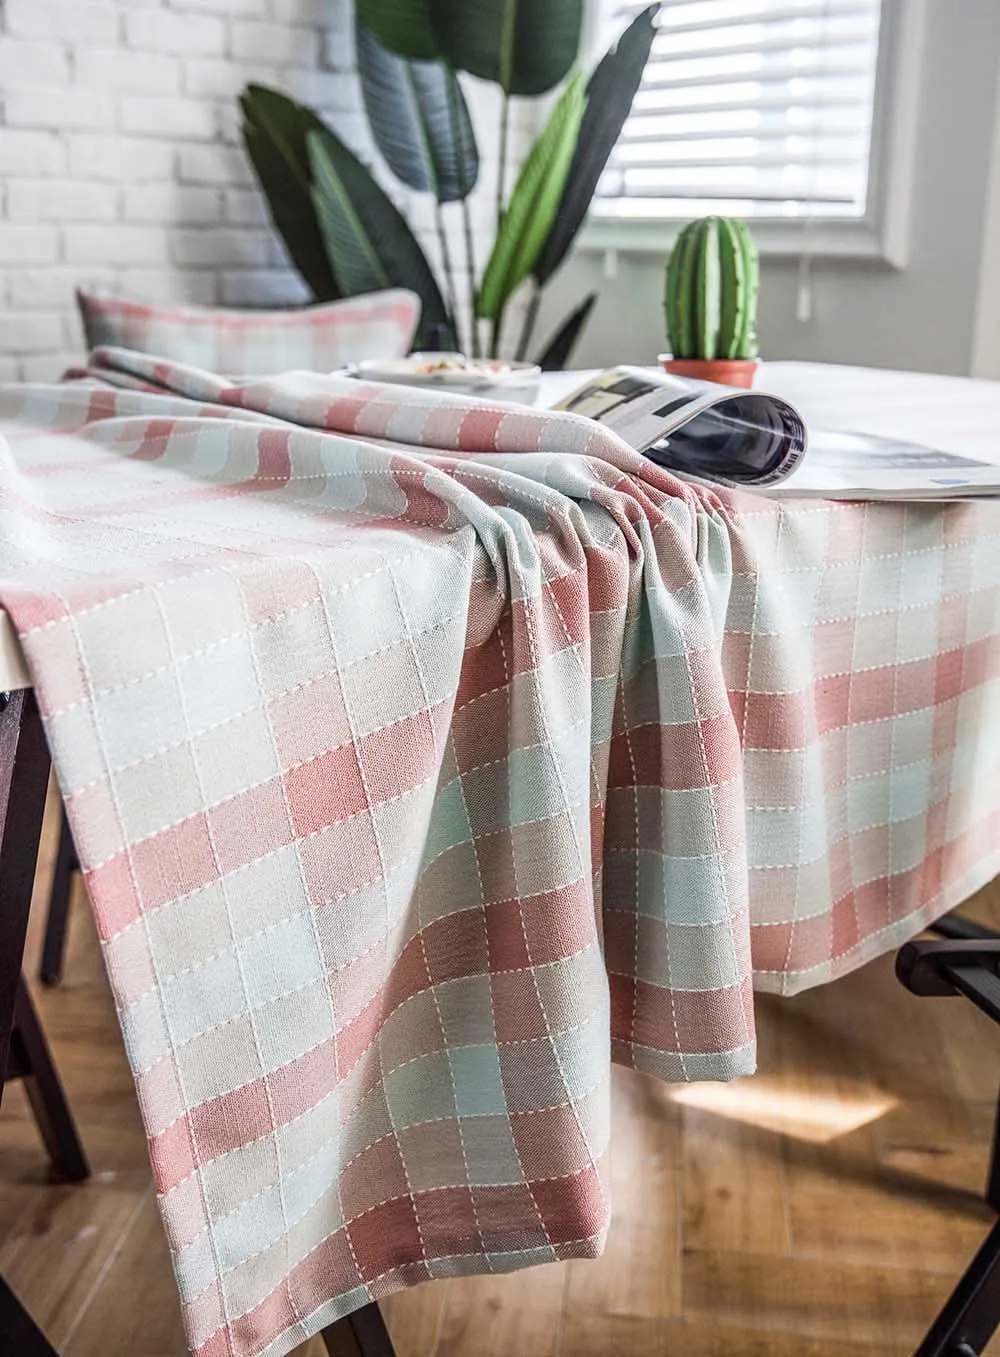 Plaid Linen Pink Wedding Tablecloth Blue Birthday Party Table Cover Rectangle Desk Cloth Wipe Covers Waterproof Table Cloth